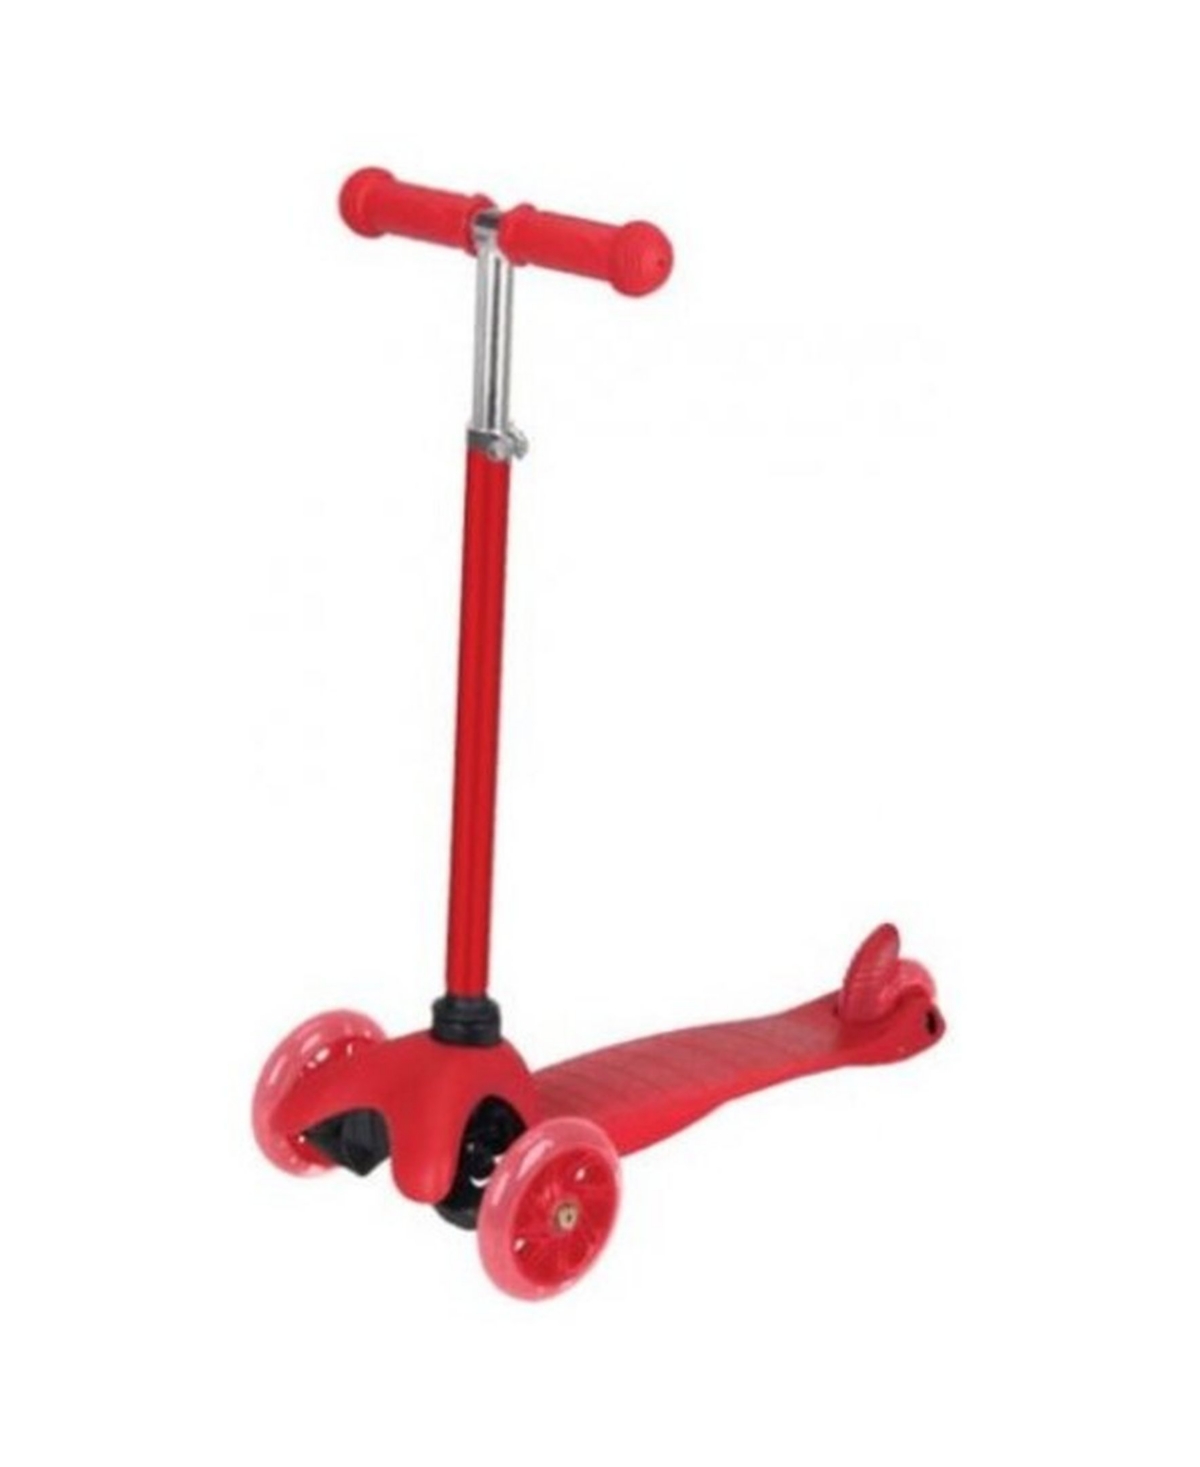 Rugged Racers Mini 3 Wheel Scooter With Led Lights In Red